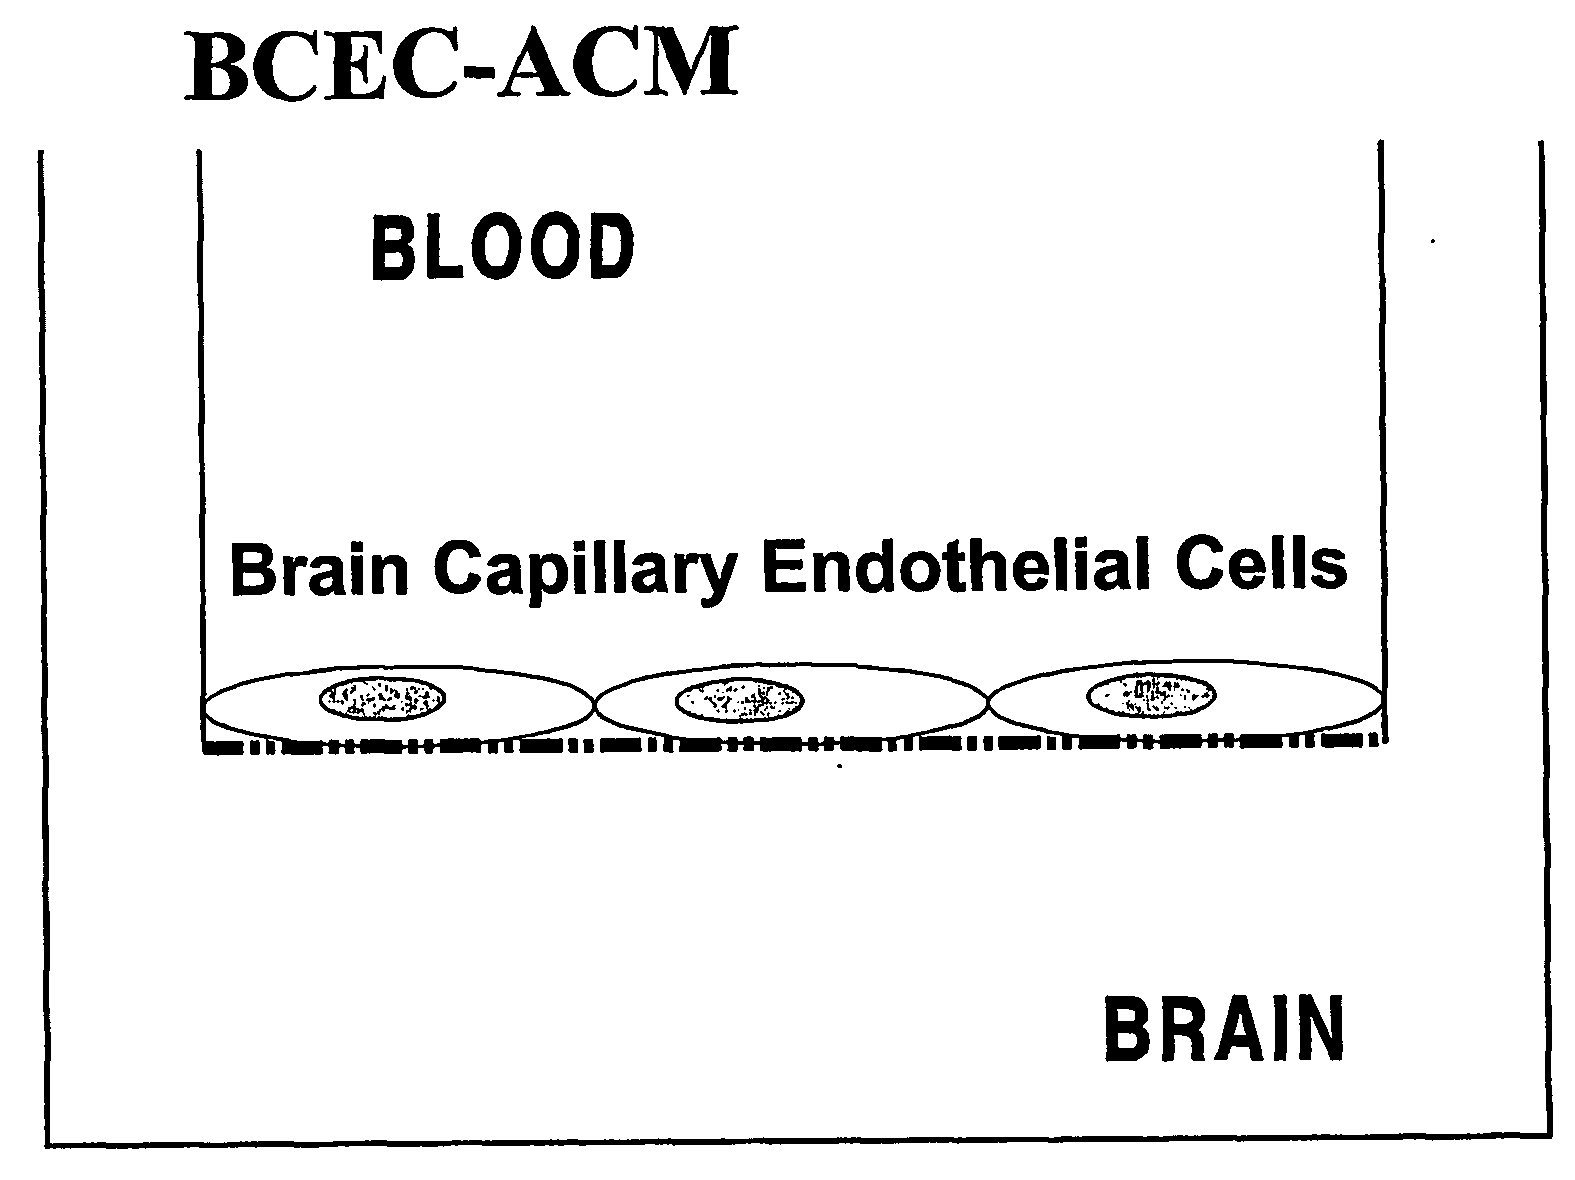 Differentially Expressed Nucleic Acids in the Blood-Brain Barrier Under Inflammatory Conditions